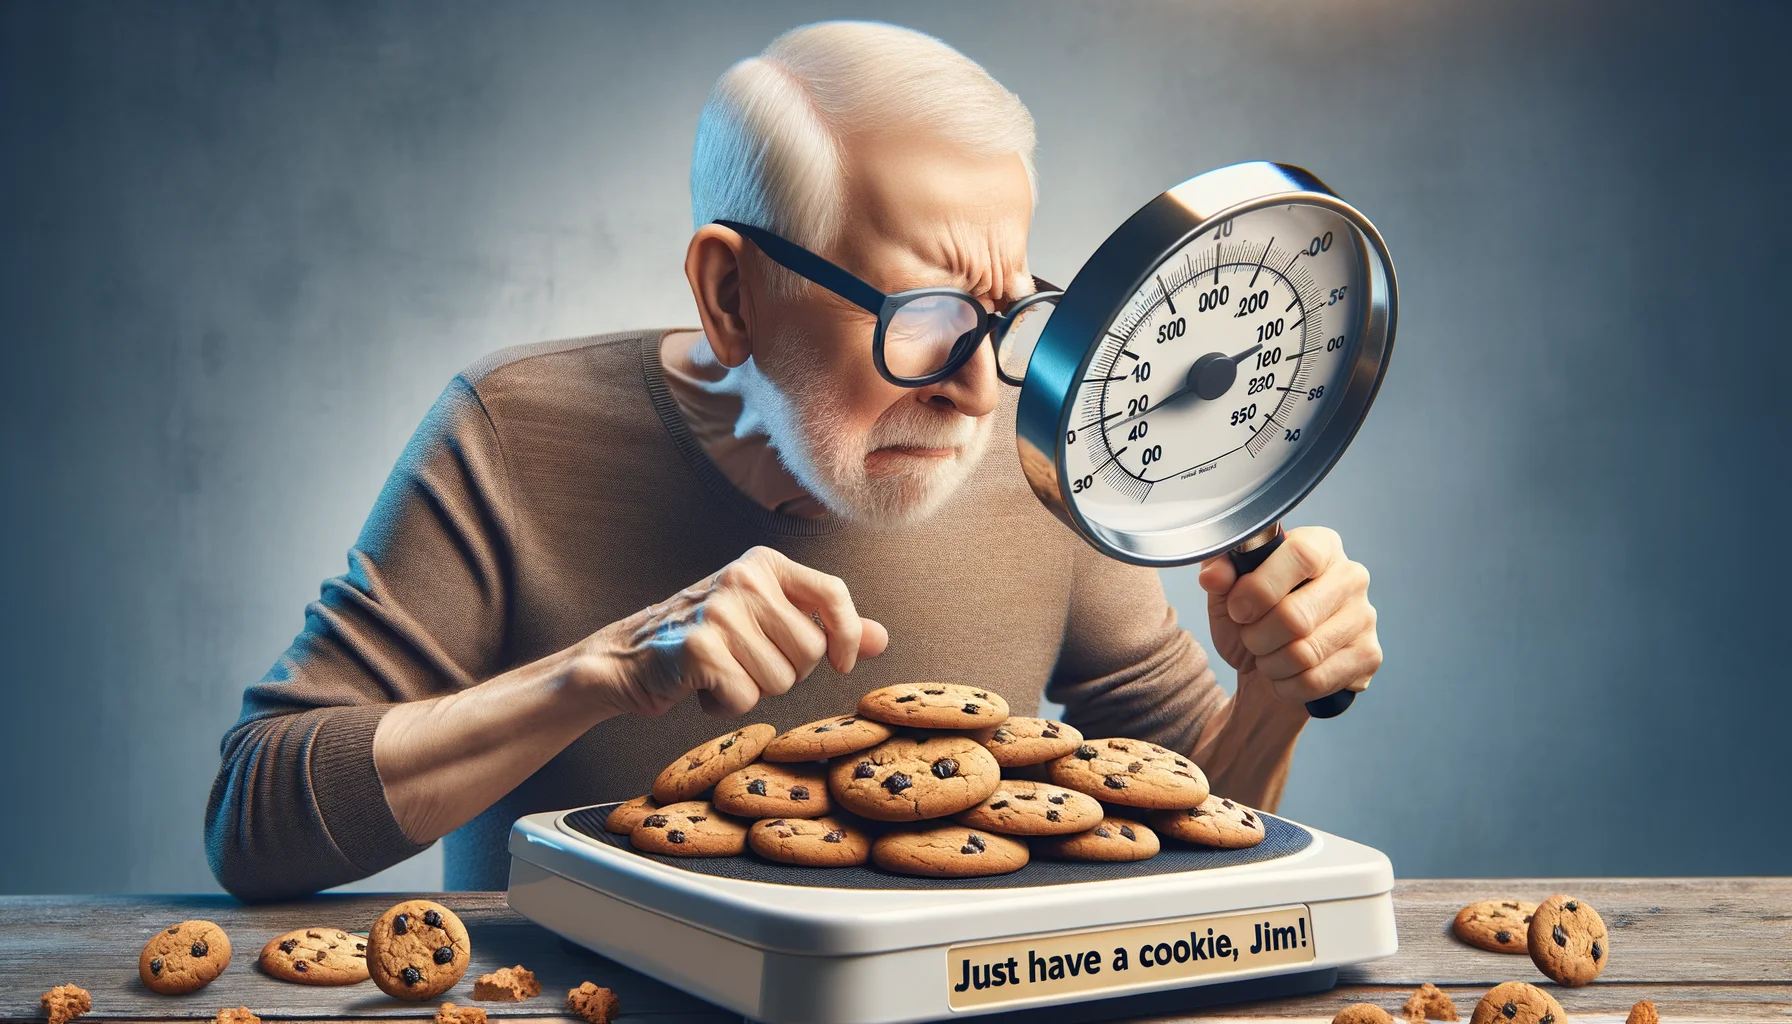 Create a humorous, realistic scene featuring a retired Caucasian male dieter trying to read the microscopic nutrition facts on a pack of cookies with a giant magnifying glass. As an extra touch of humor, the scale in the corner reads 'Just have a cookie, Jim!'. Let's have a laugh, but treat our elderly character with respect, focusing on the light-hearted humor that comes with the struggles of dieting and aging.